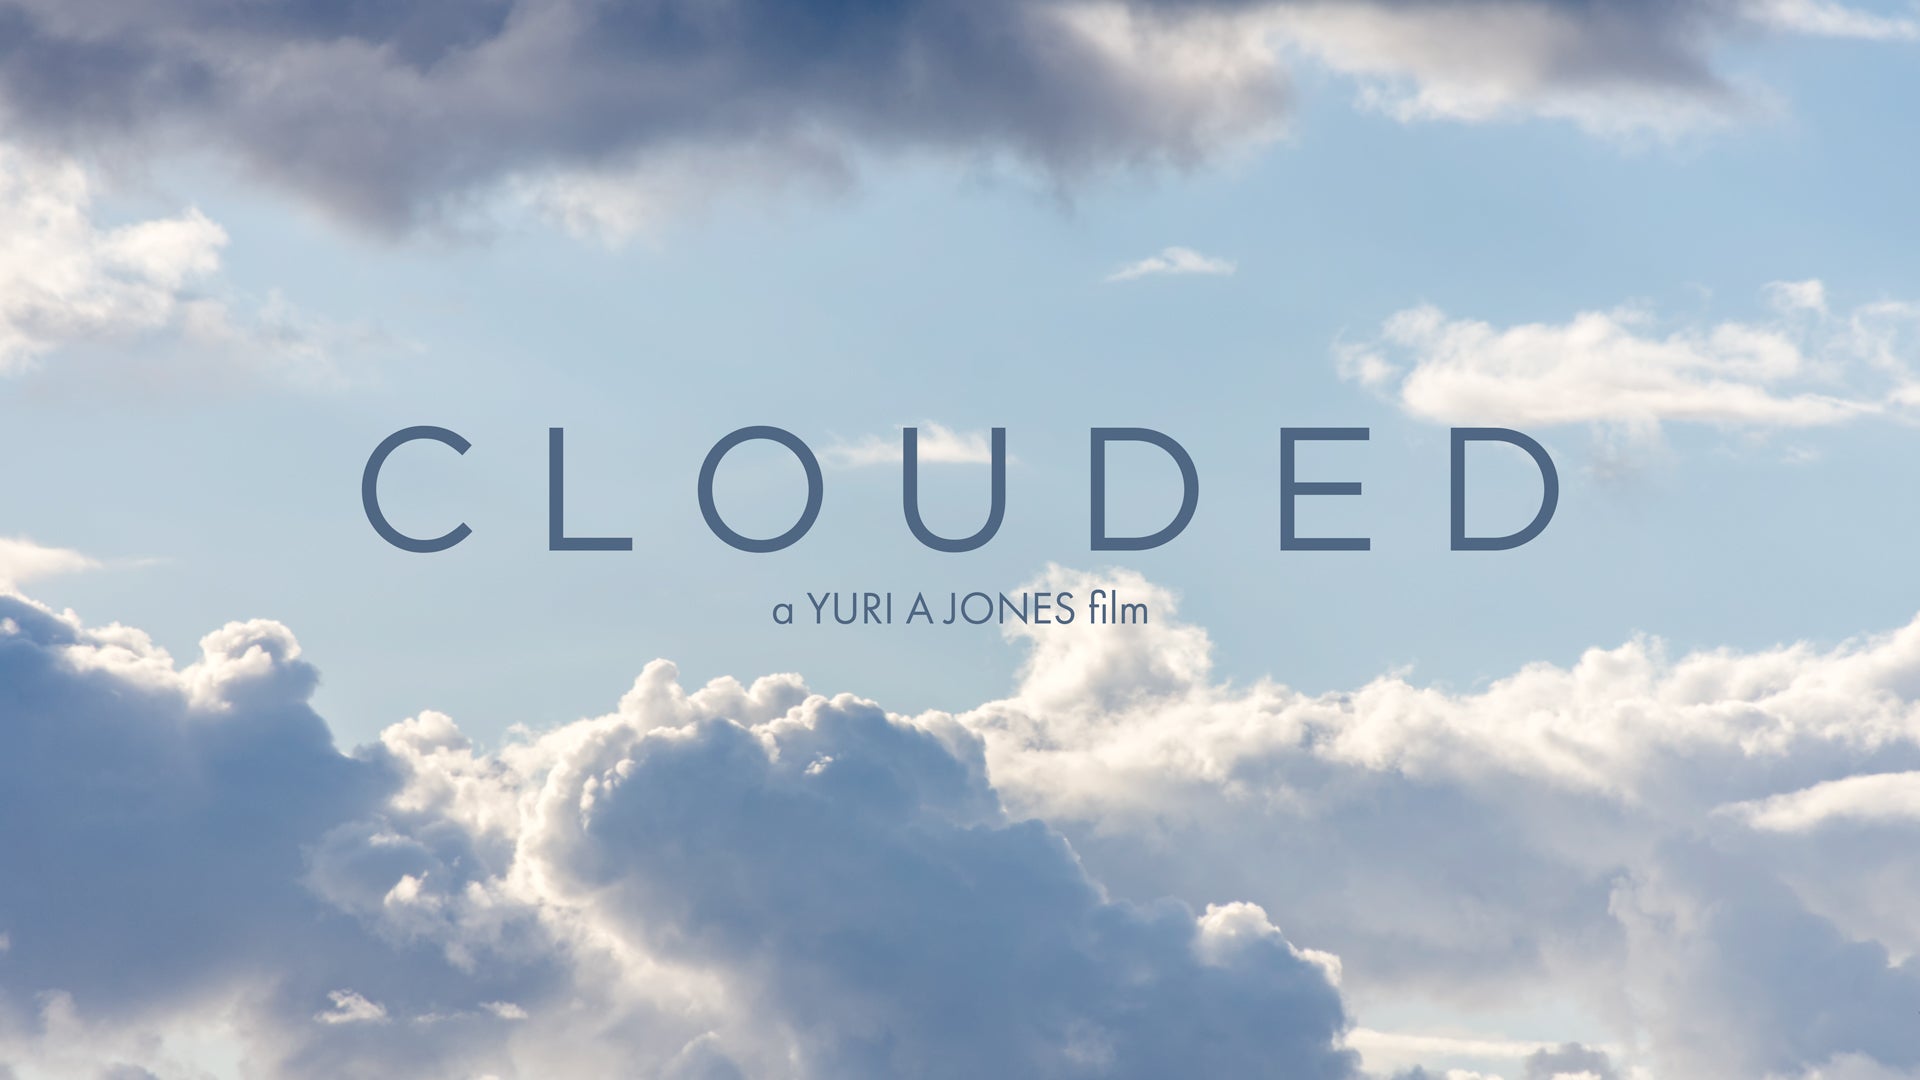 The release of my new timelapse film "Clouded"